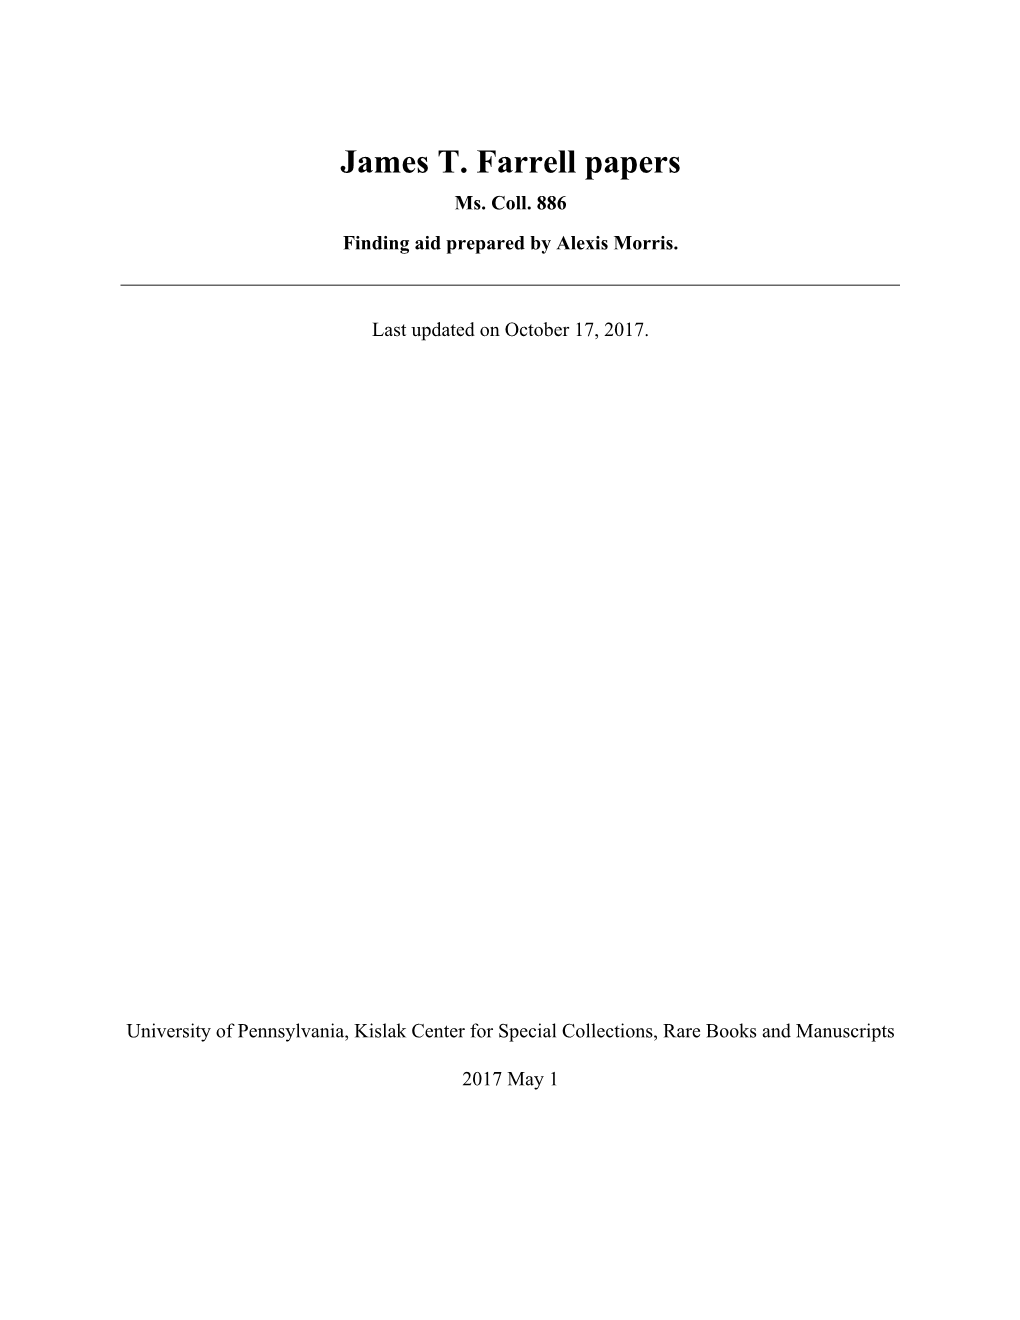 James T. Farrell Papers Ms